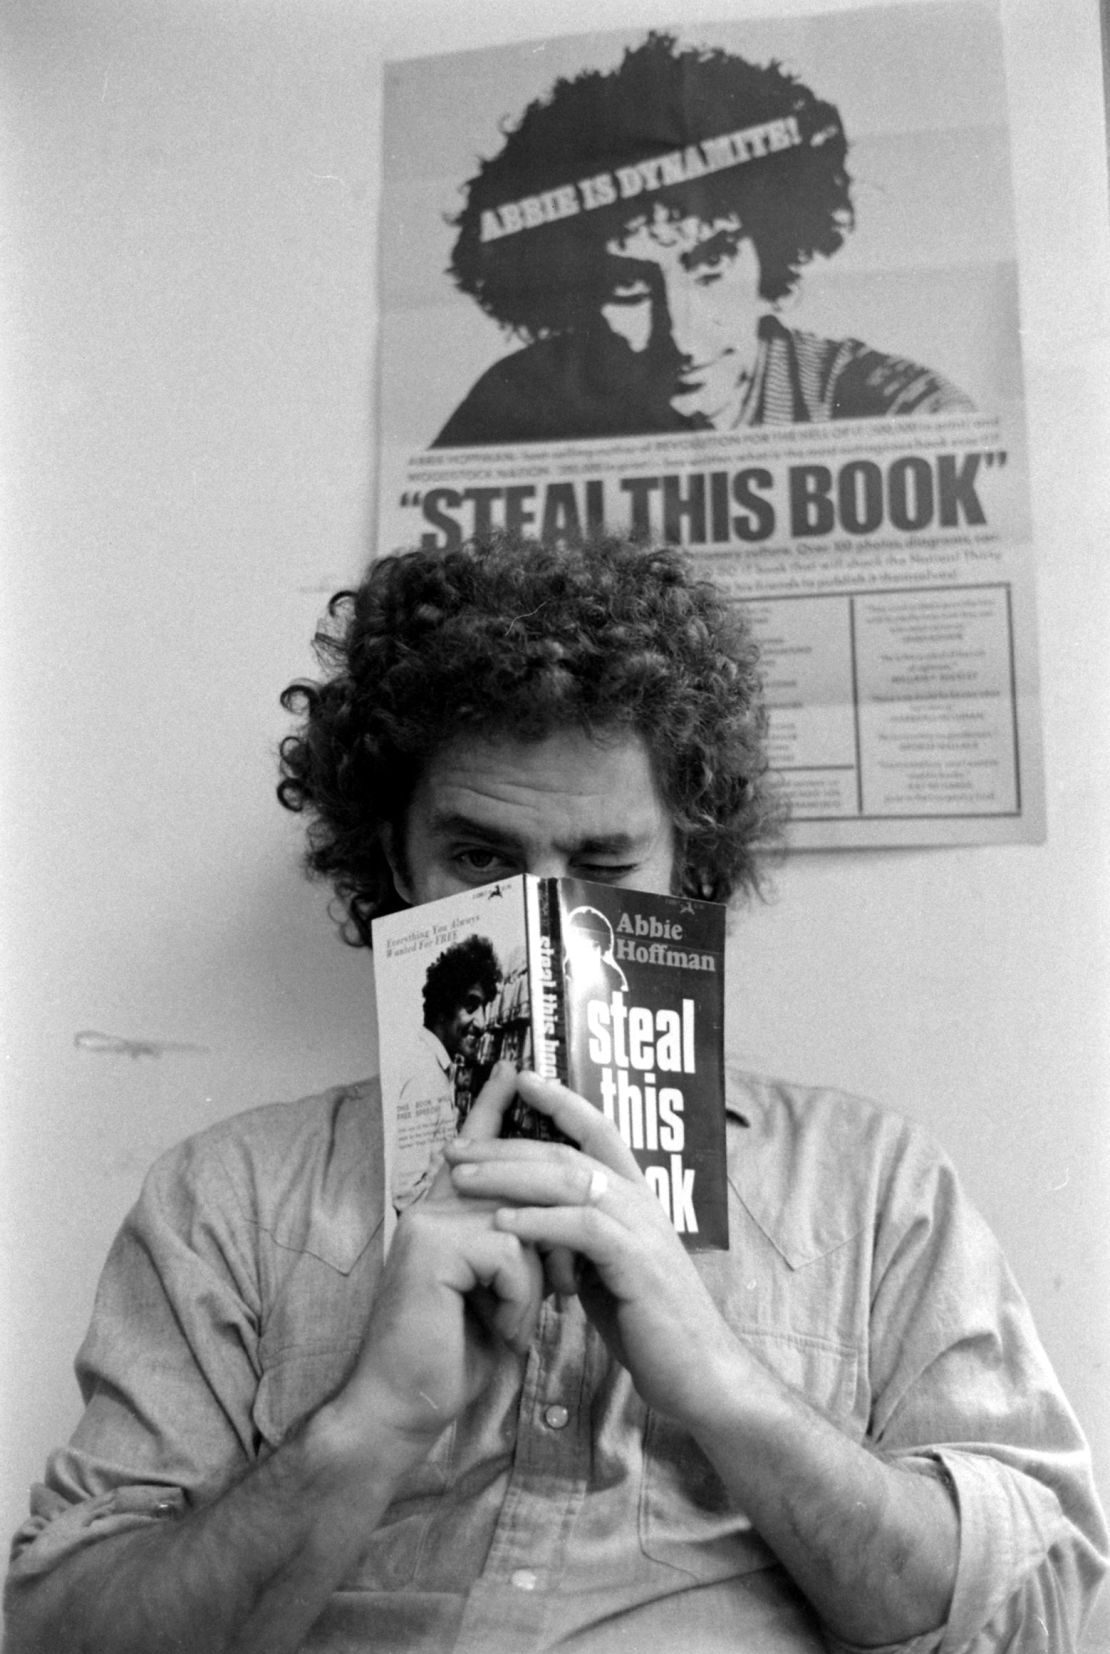 Abbie Hoffman holding a copy of "Steal This Book" in 1971.